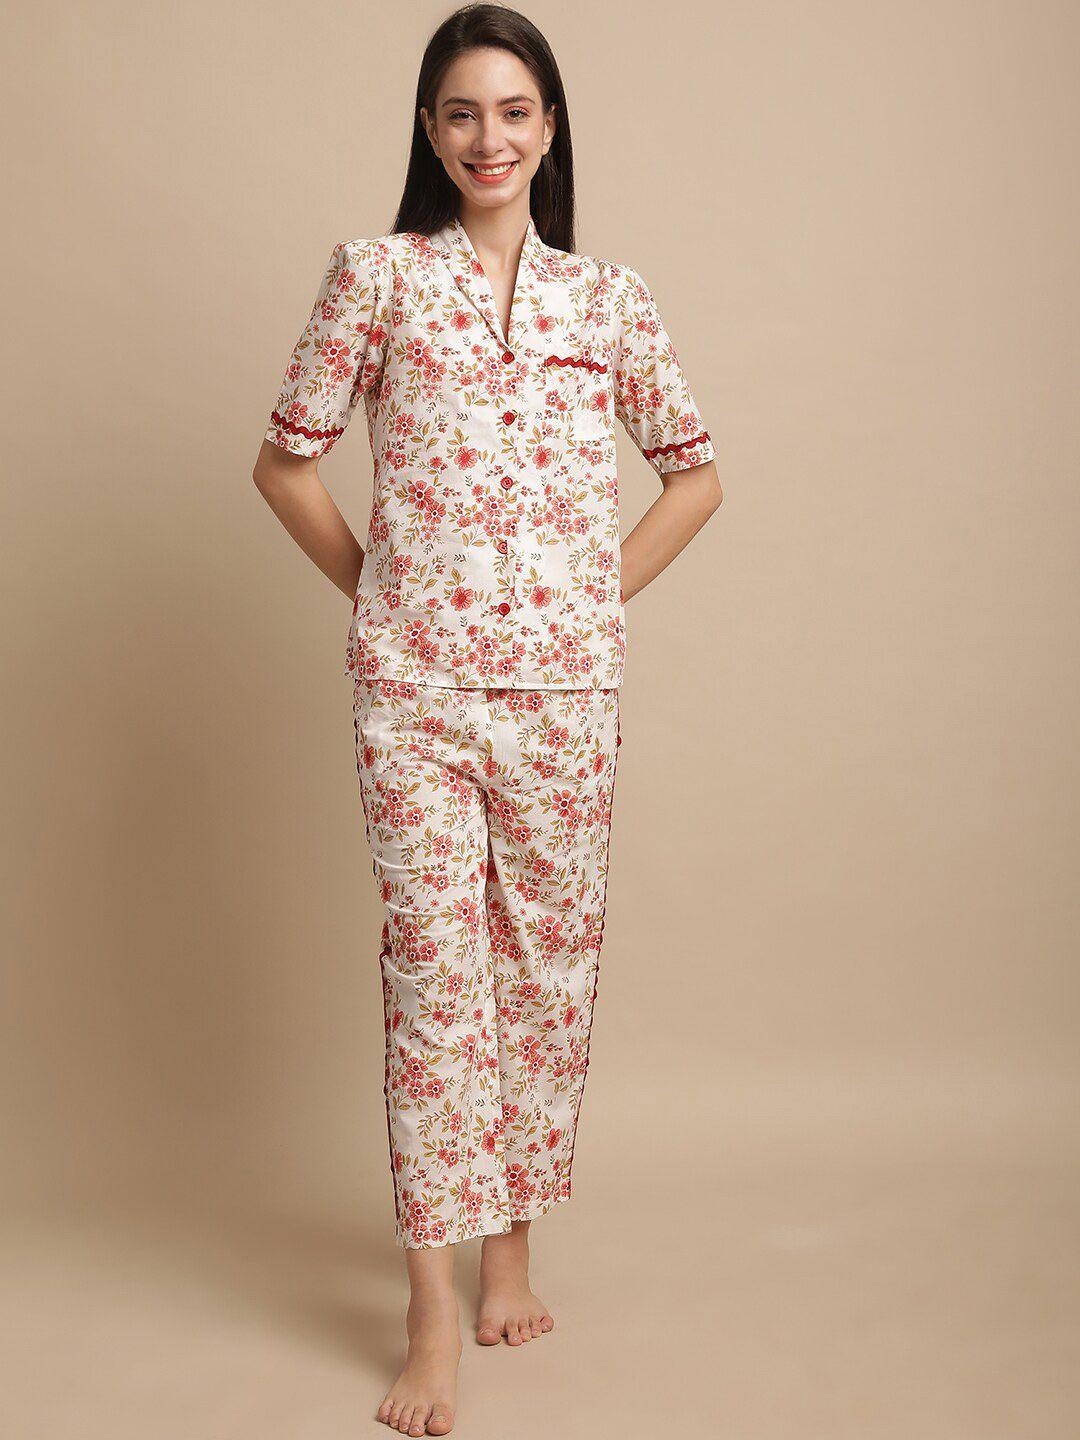 blanc9 floral printed pure cotton shirt & trousers